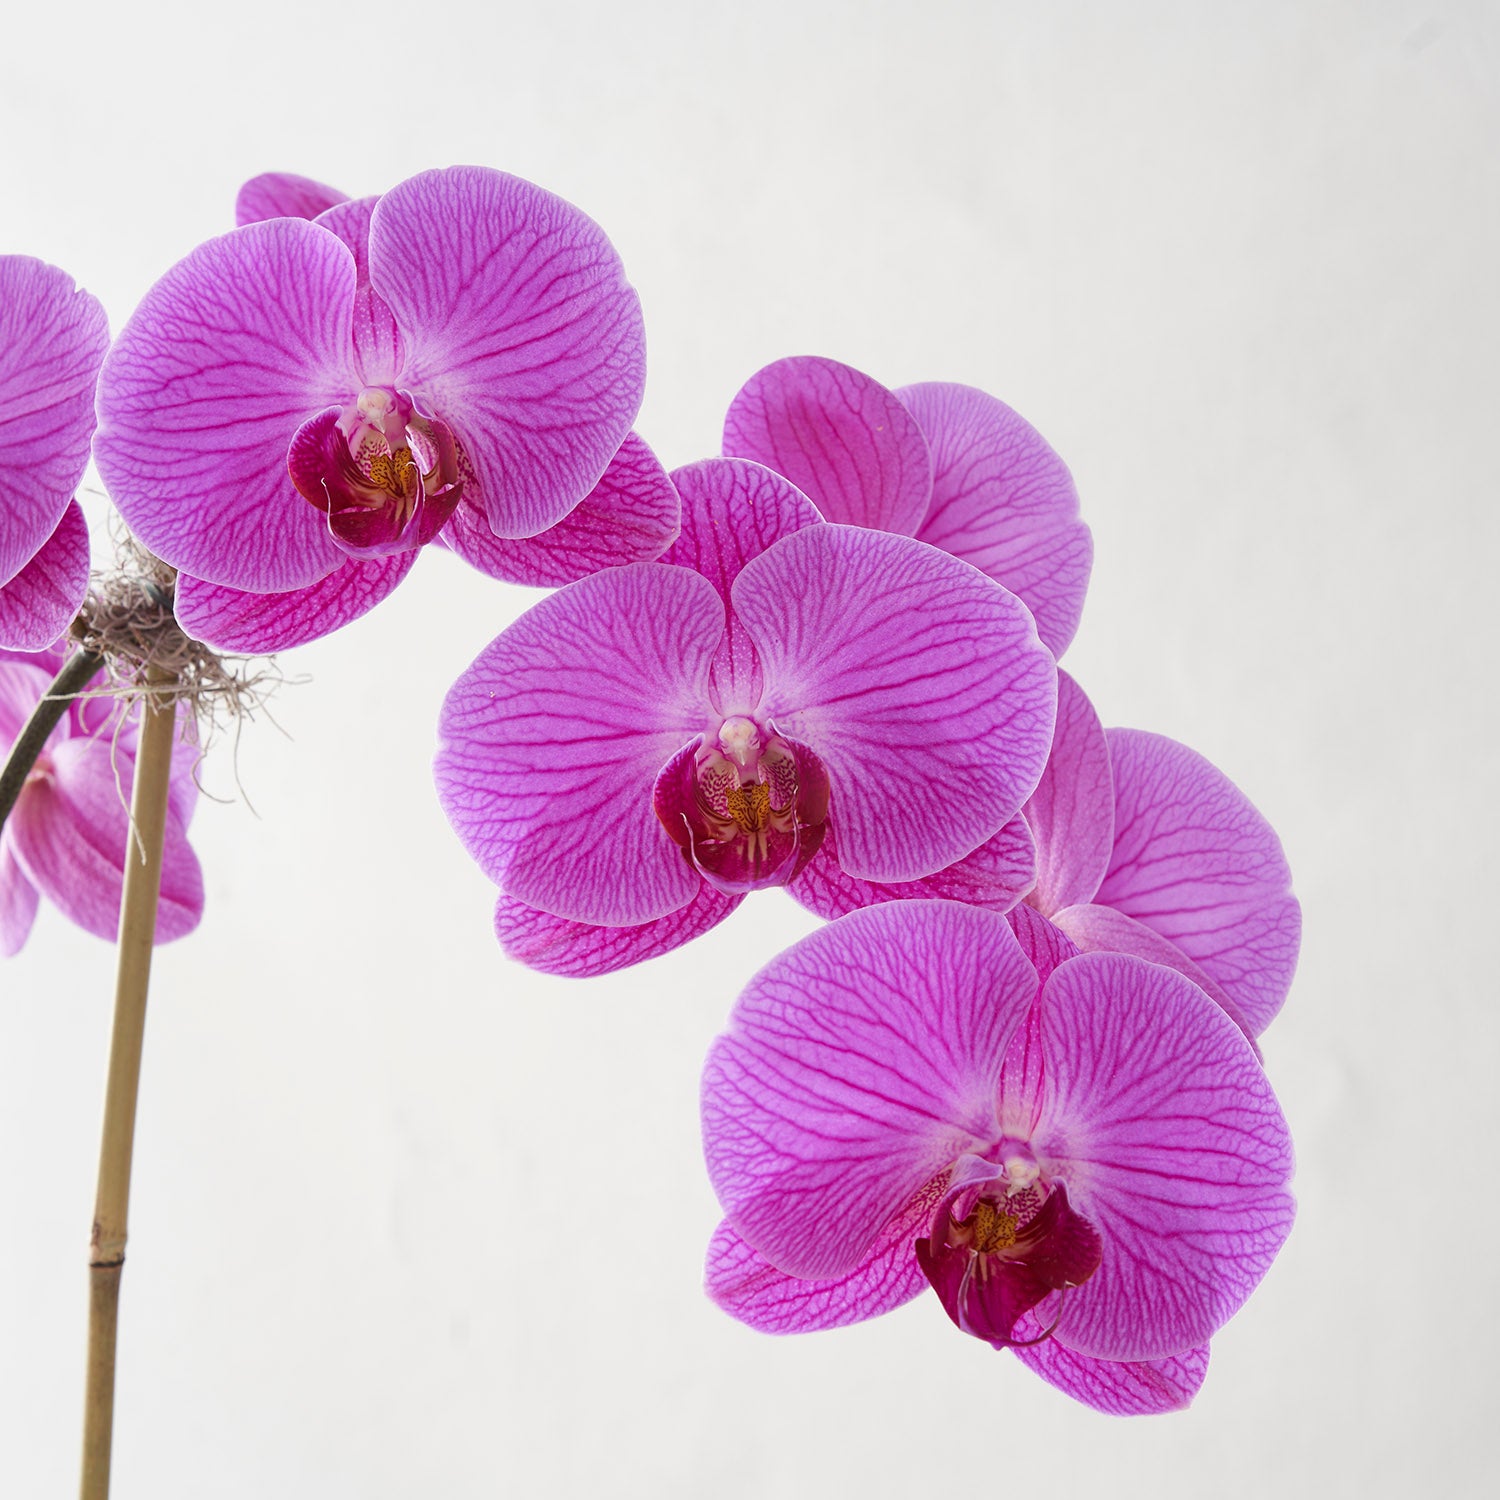 Closeup of fuchsia and pink verigated phalaenopsis flowers on white background 